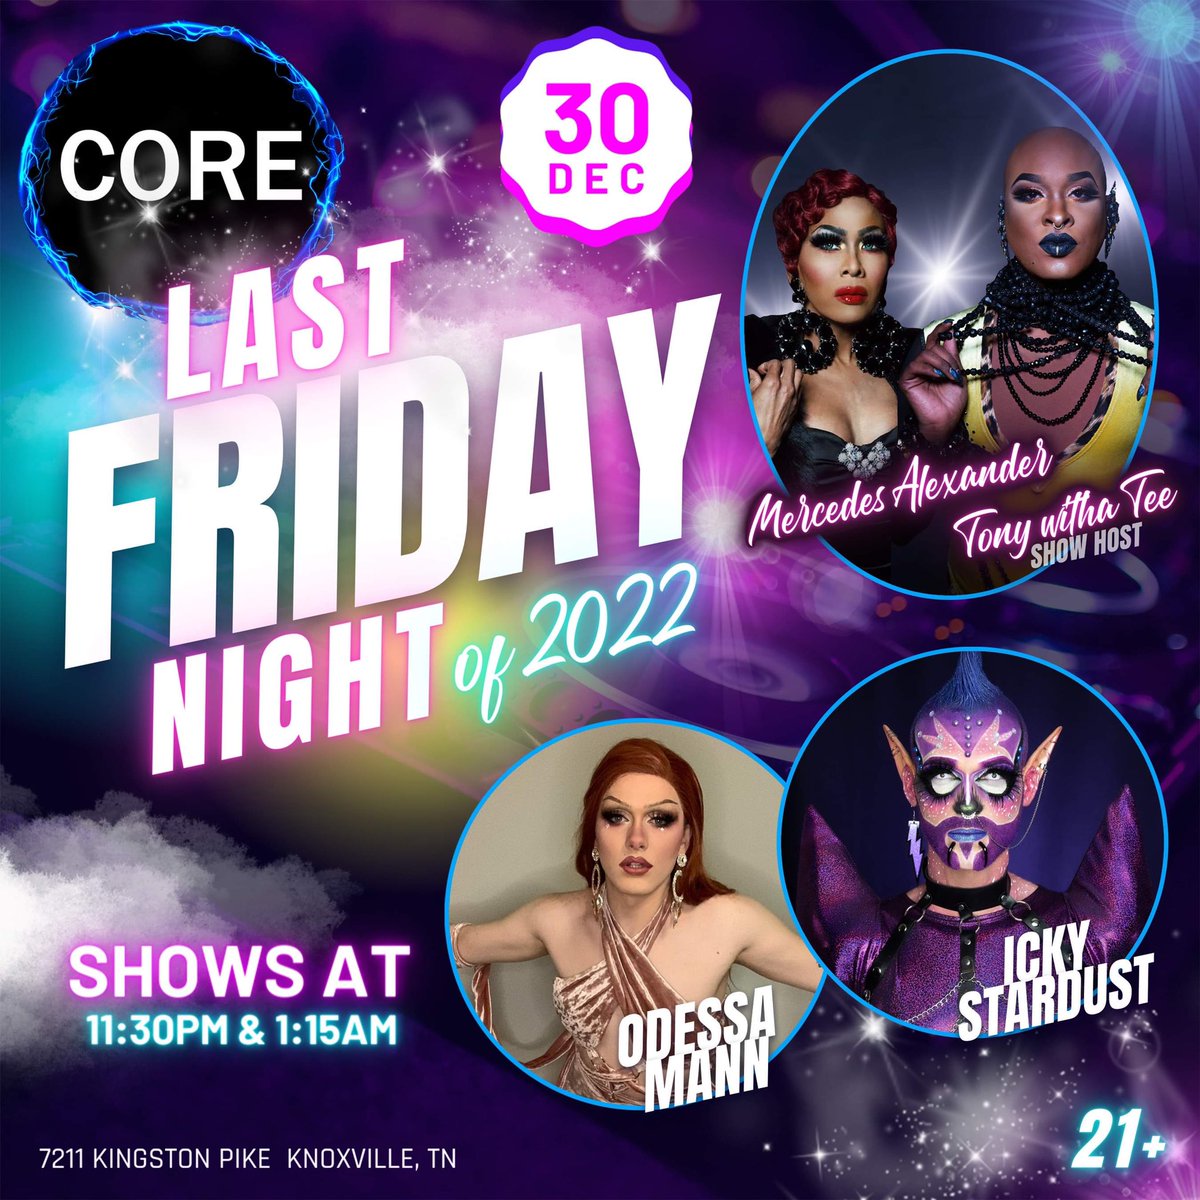 Join me at CORE this Friday night for the Last Friday of 2022! It’s gonna be a great night. #SupportSmallBusiness #COREknoxville #THEmercedesalexander